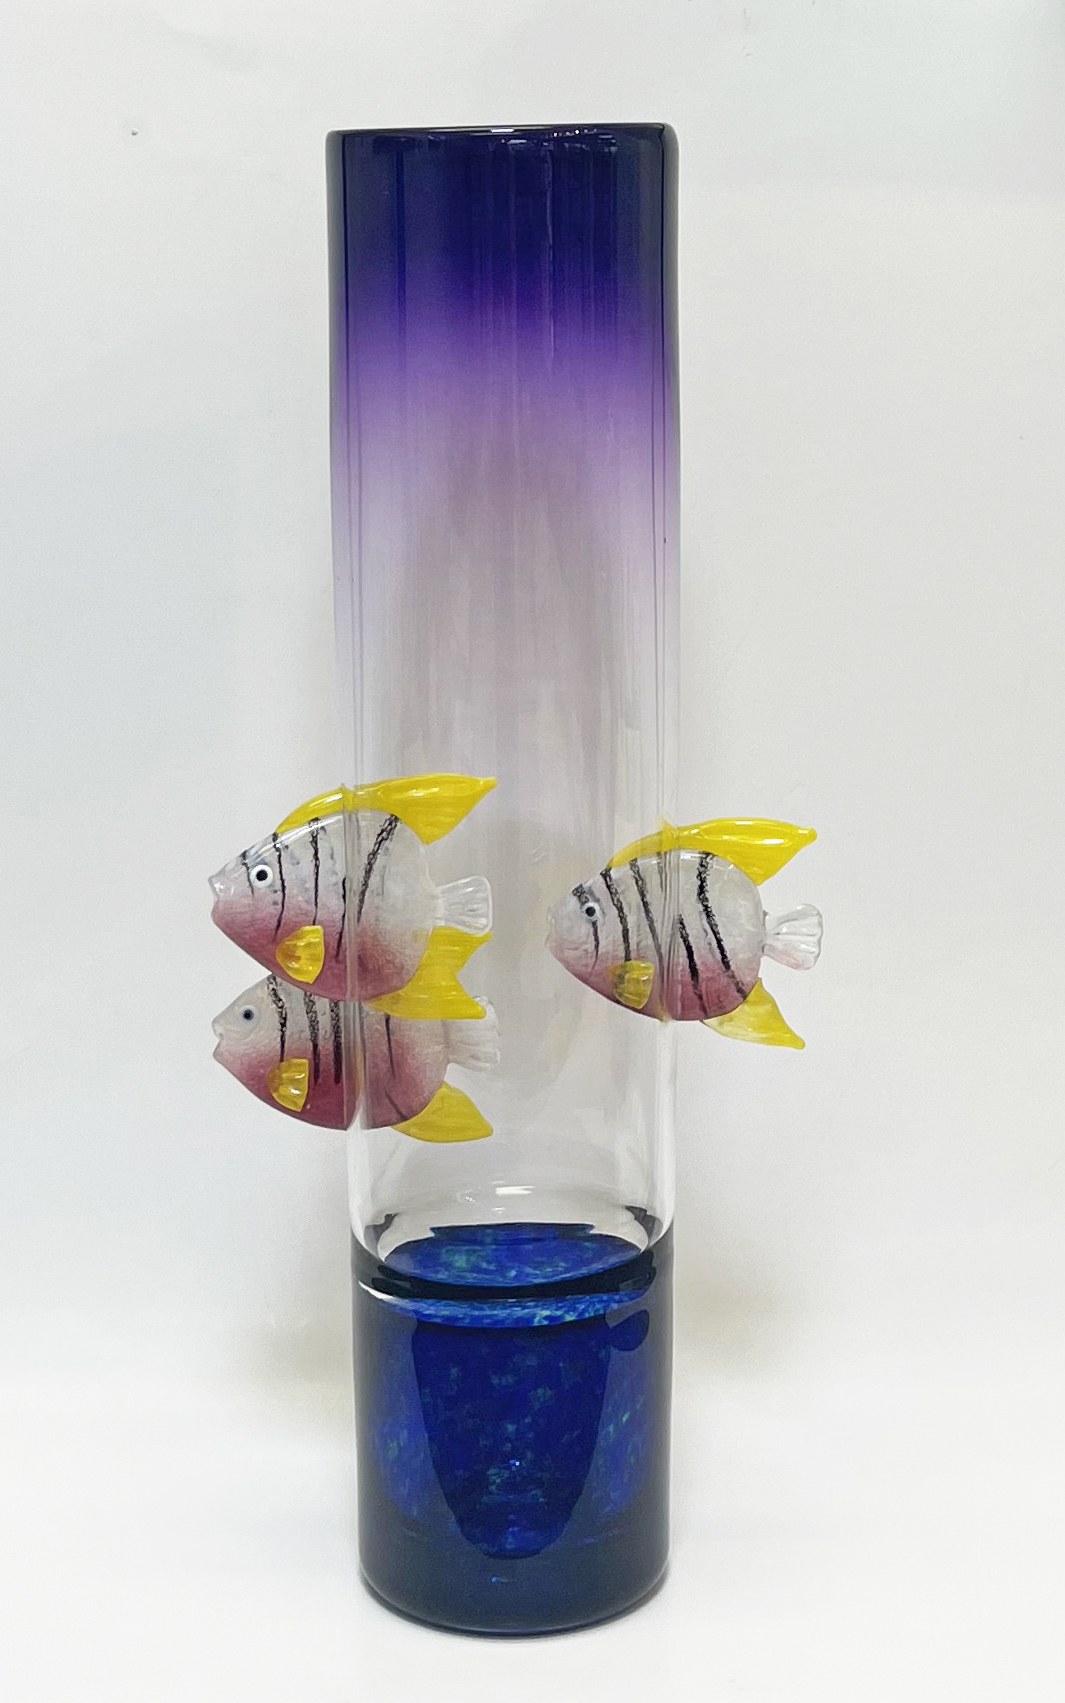 Unique art glass vase with handmade glass fish seemingly swimming through.